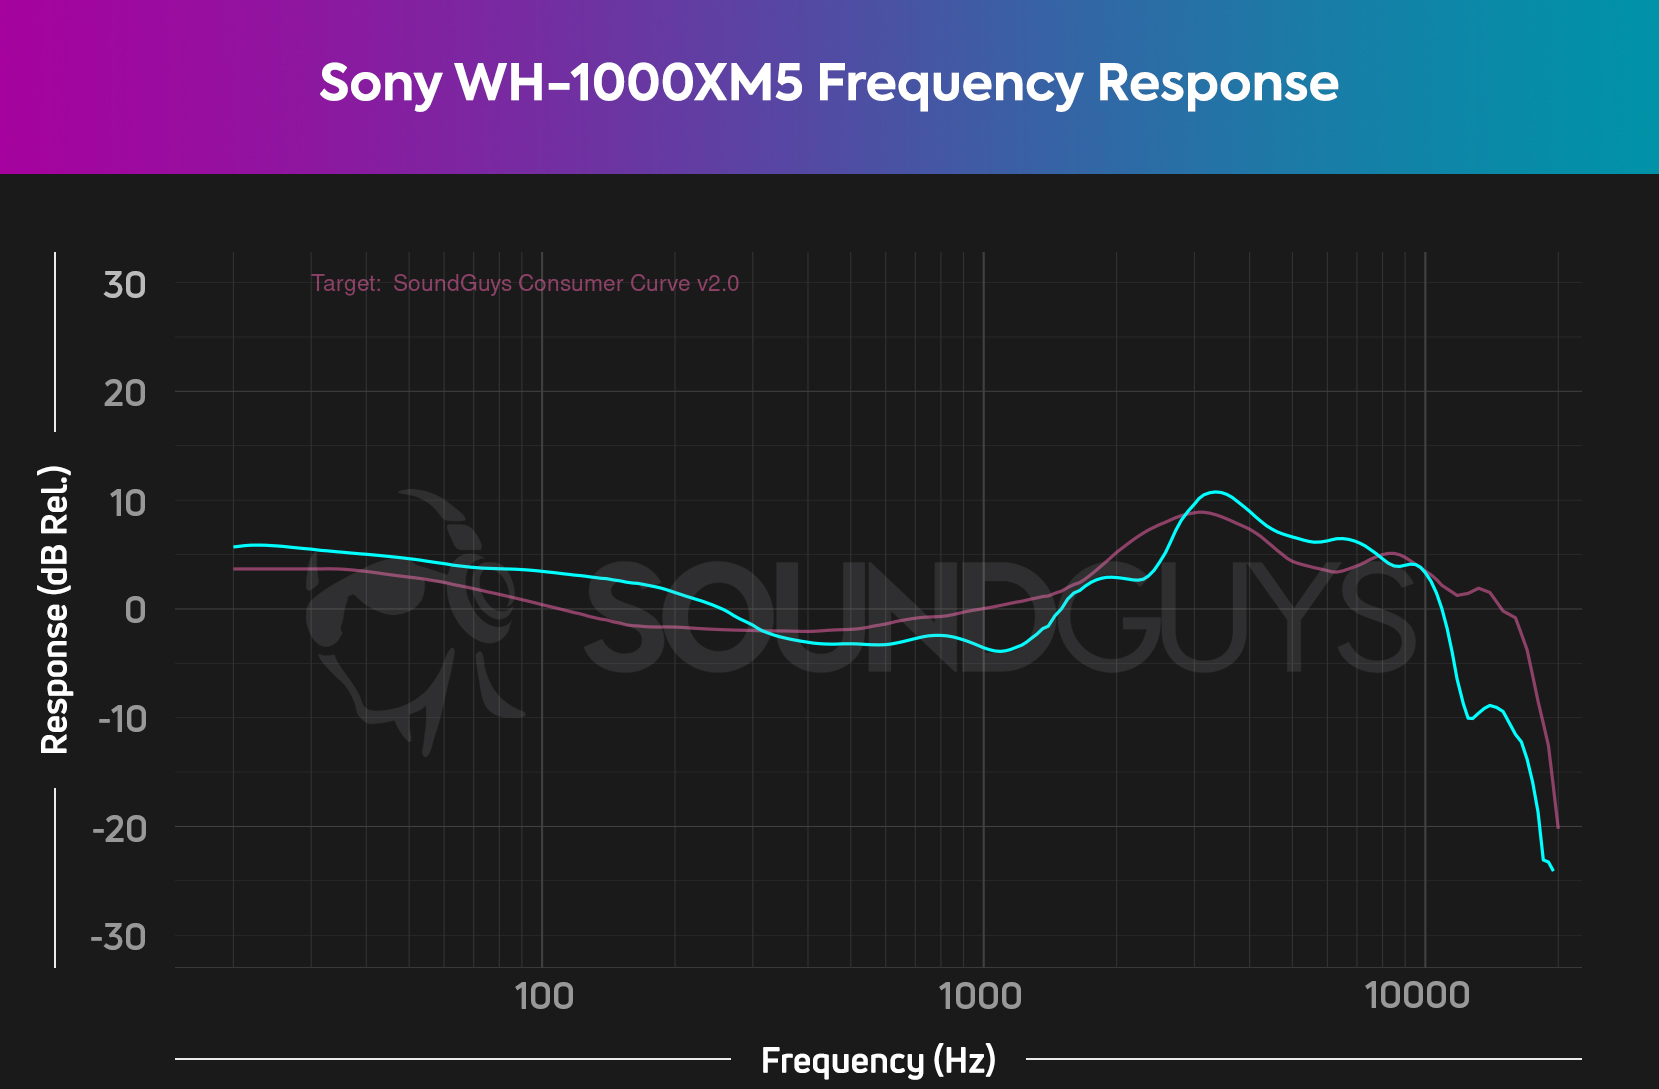 The Sony WH-1000XM5 boosts sounds up to 300Hz by about 5dB.